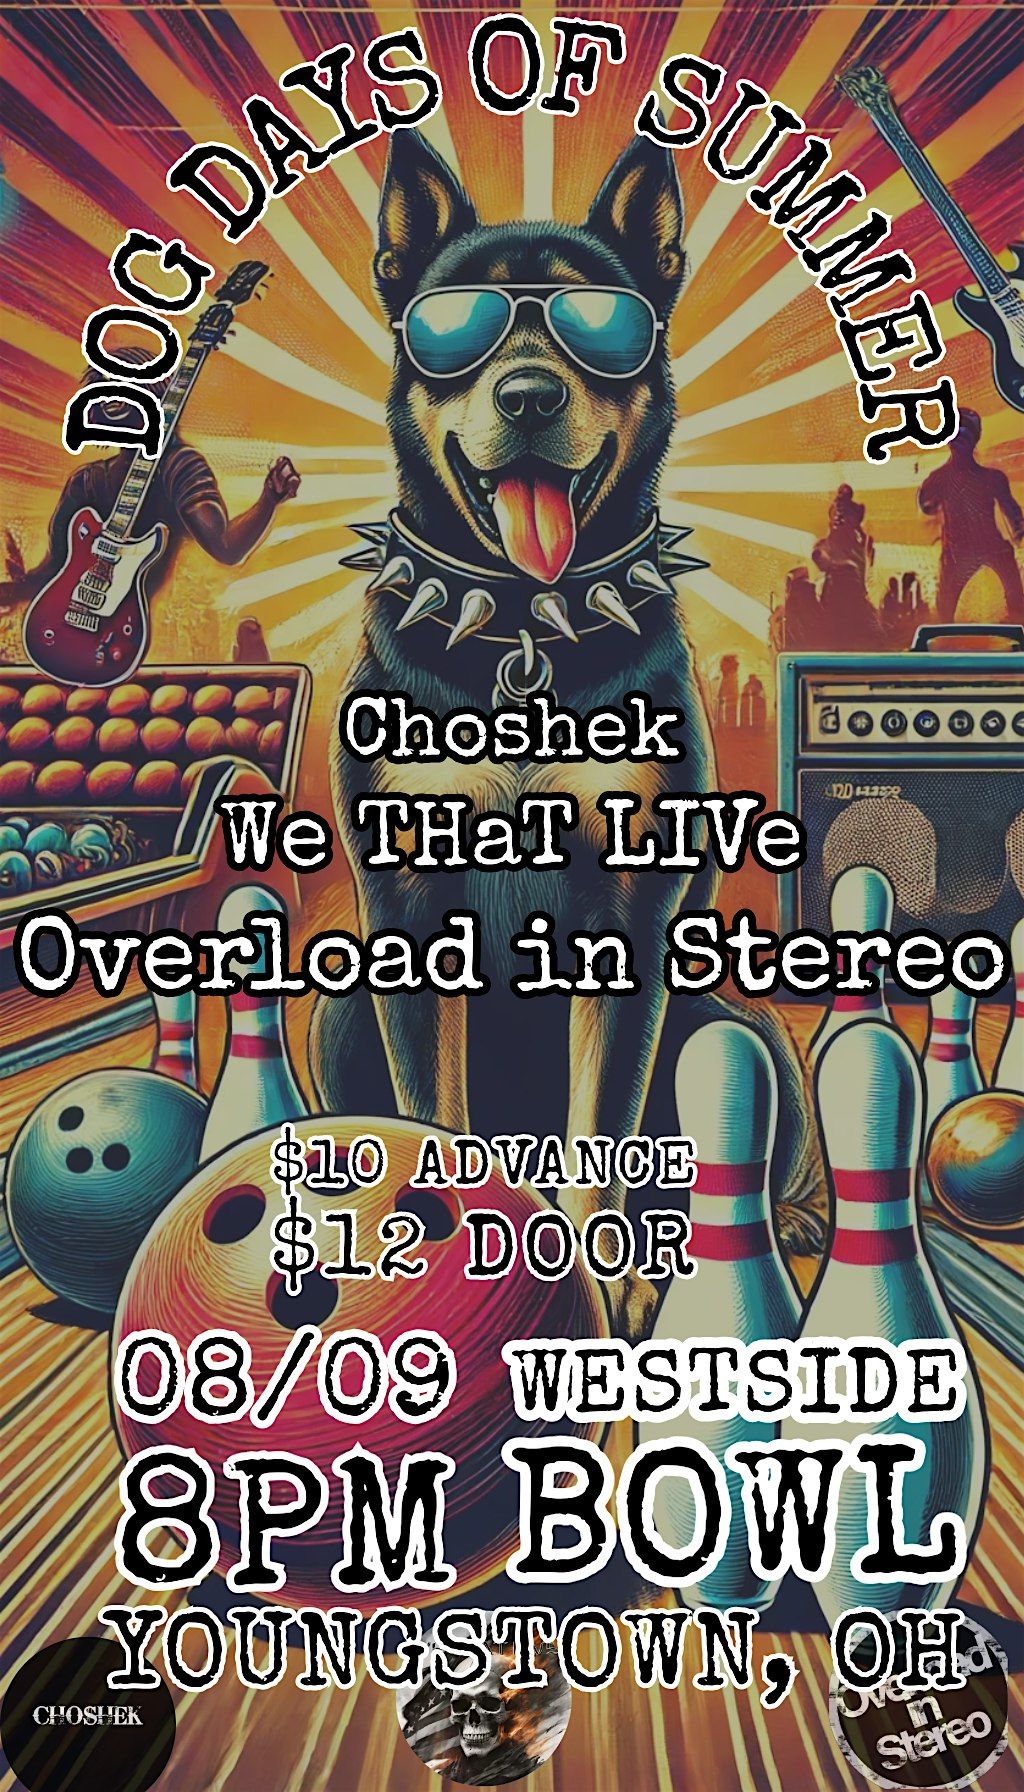 Choshek\/We THaT LIVe \/Overload in Stereo